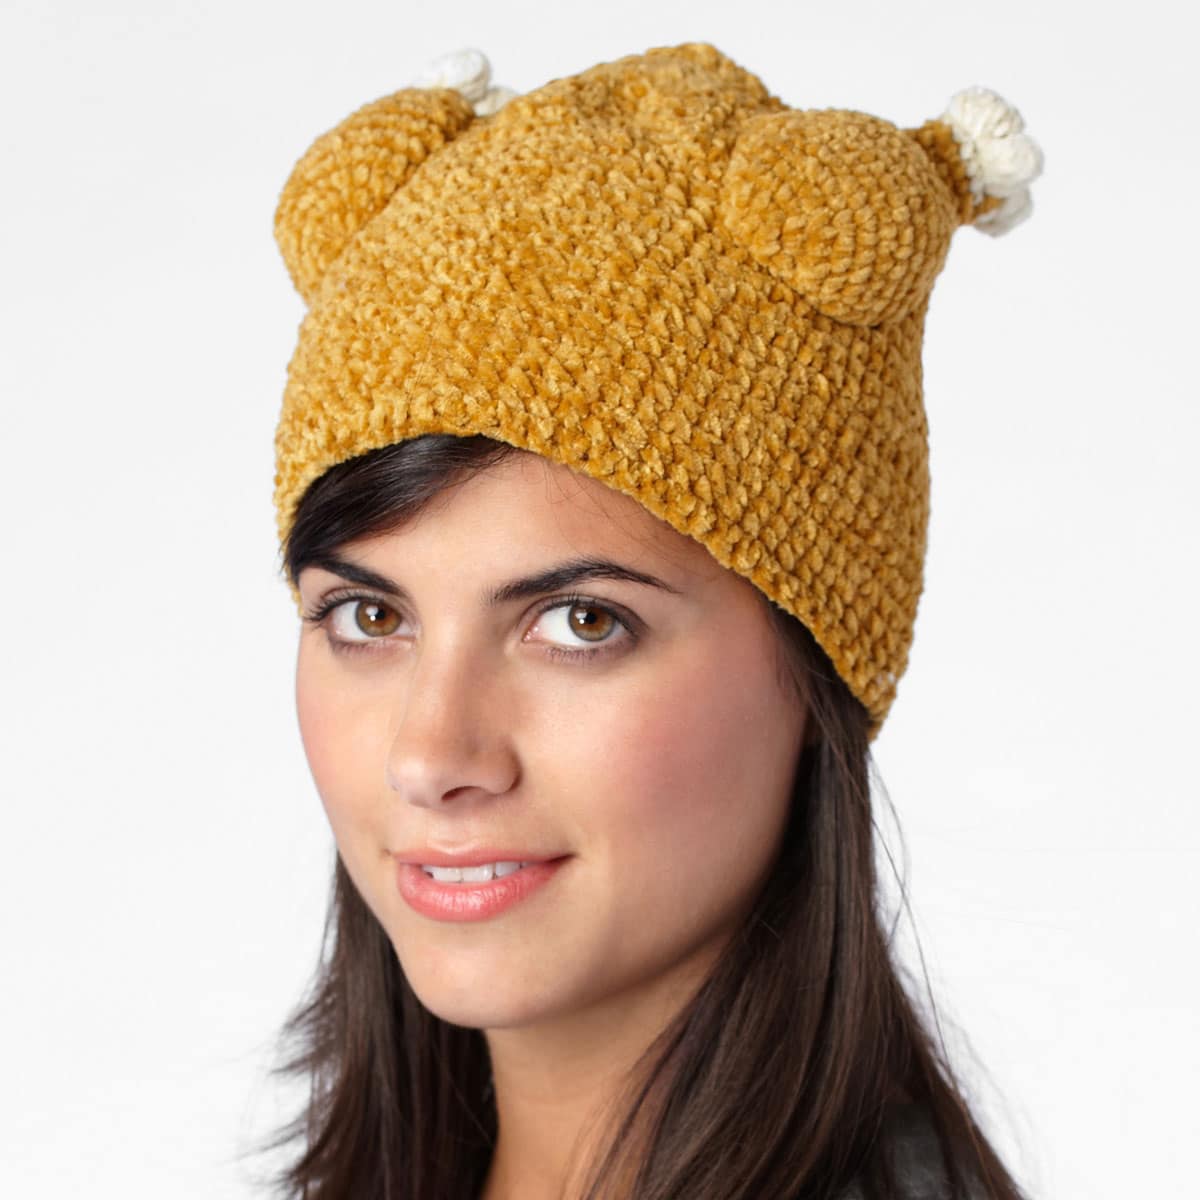 The Knitted Turkey Hat: Thanksgiving Isn't Complete Without It